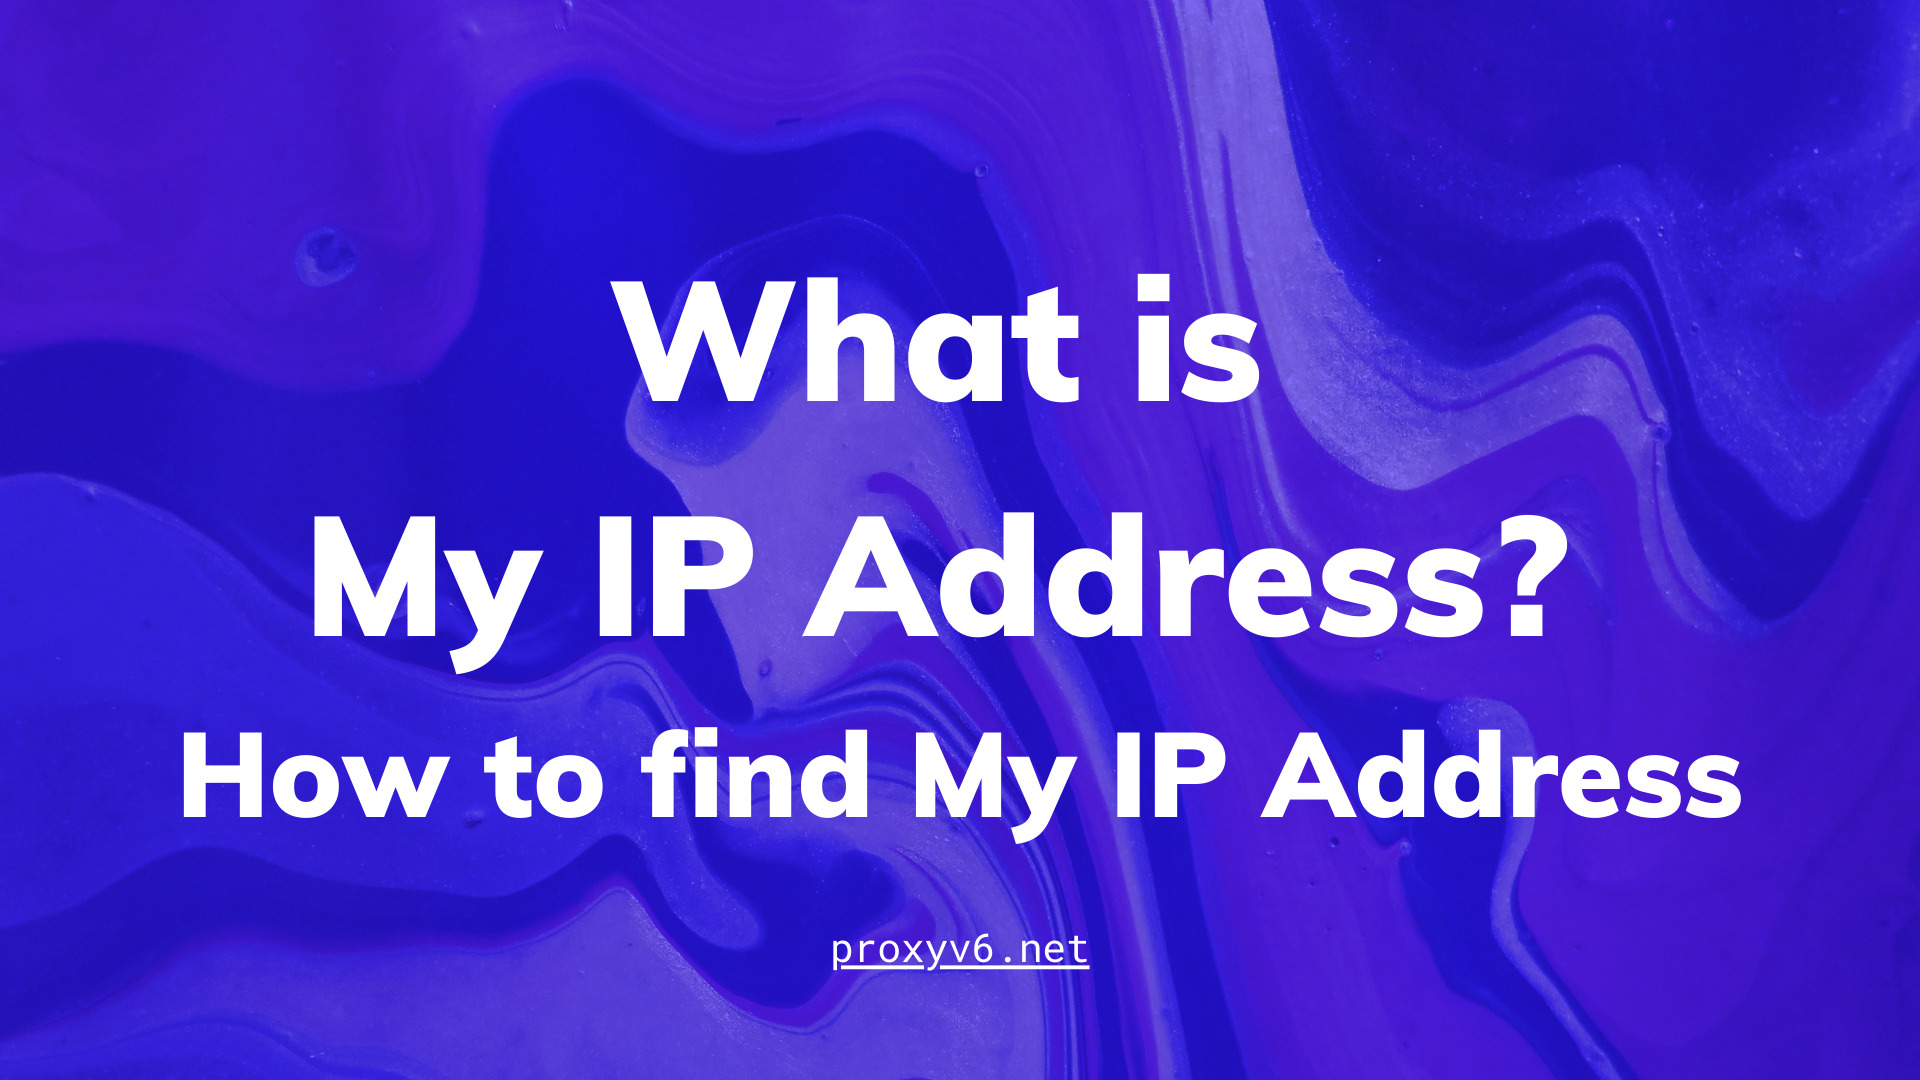 What is My IP Address? How to find My IP Address